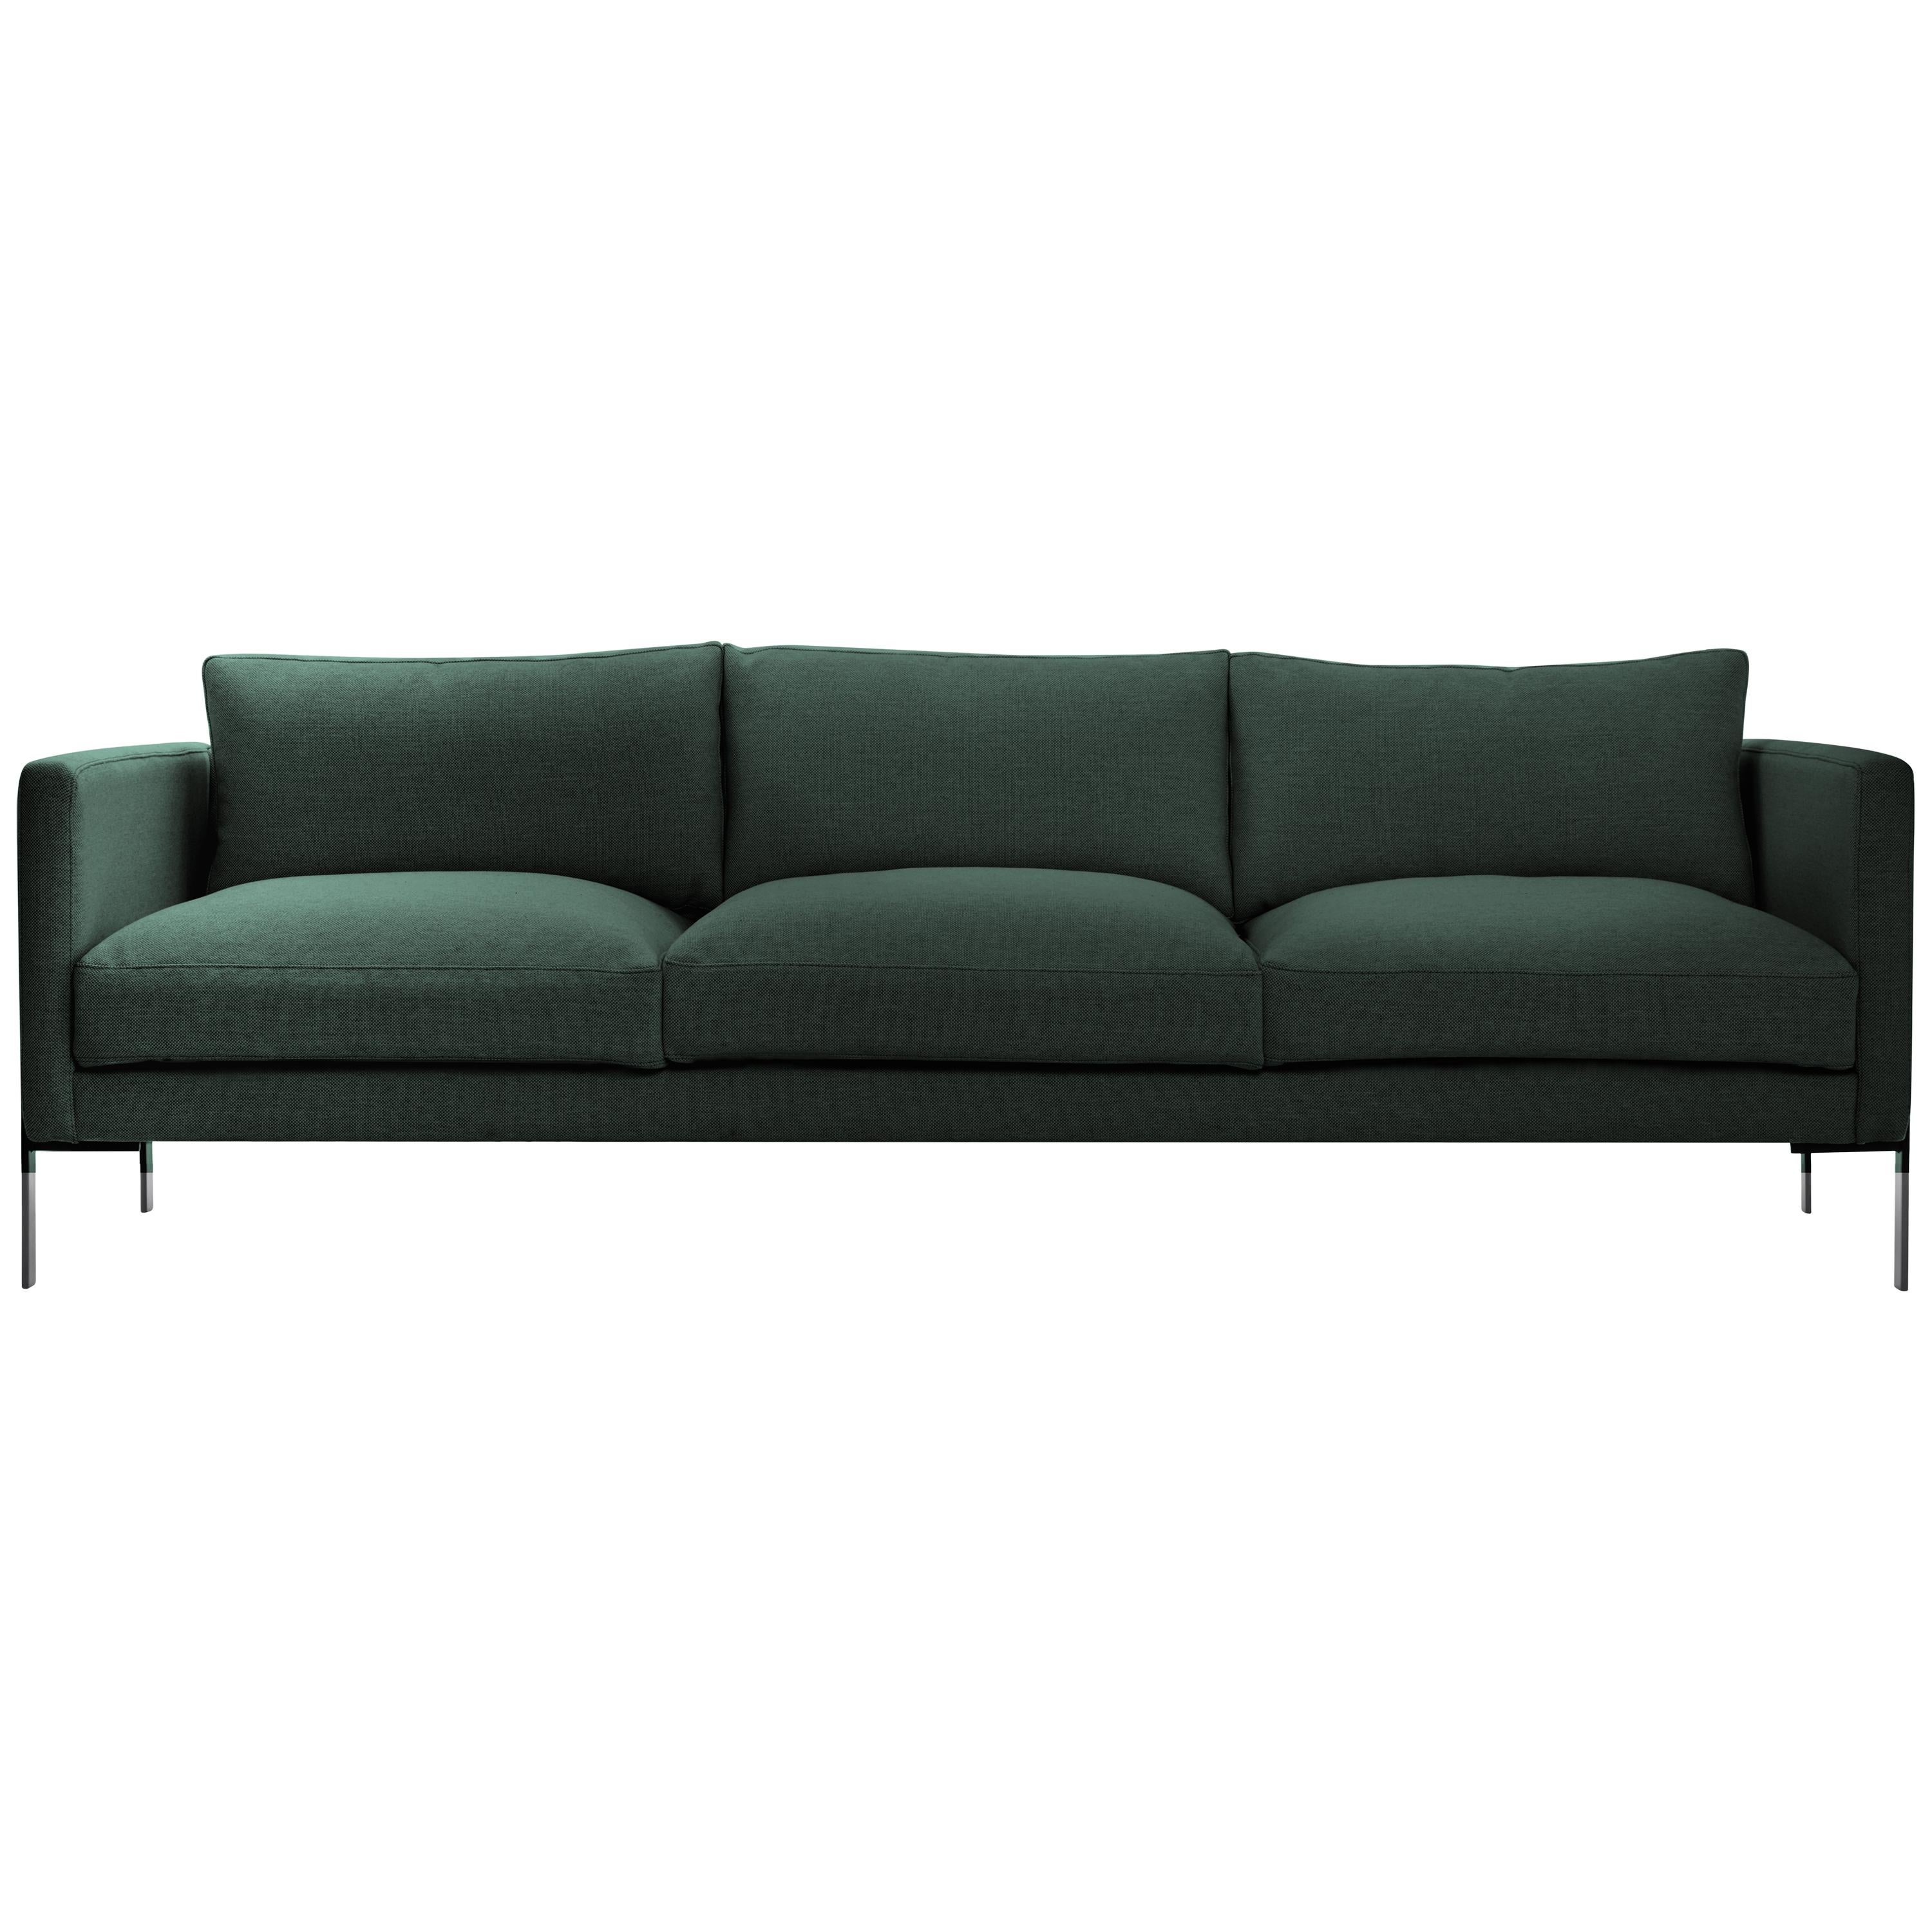 Truss Sofa in Maharam Everglade Fabric and Powder-Coated Steel by TRNK For Sale